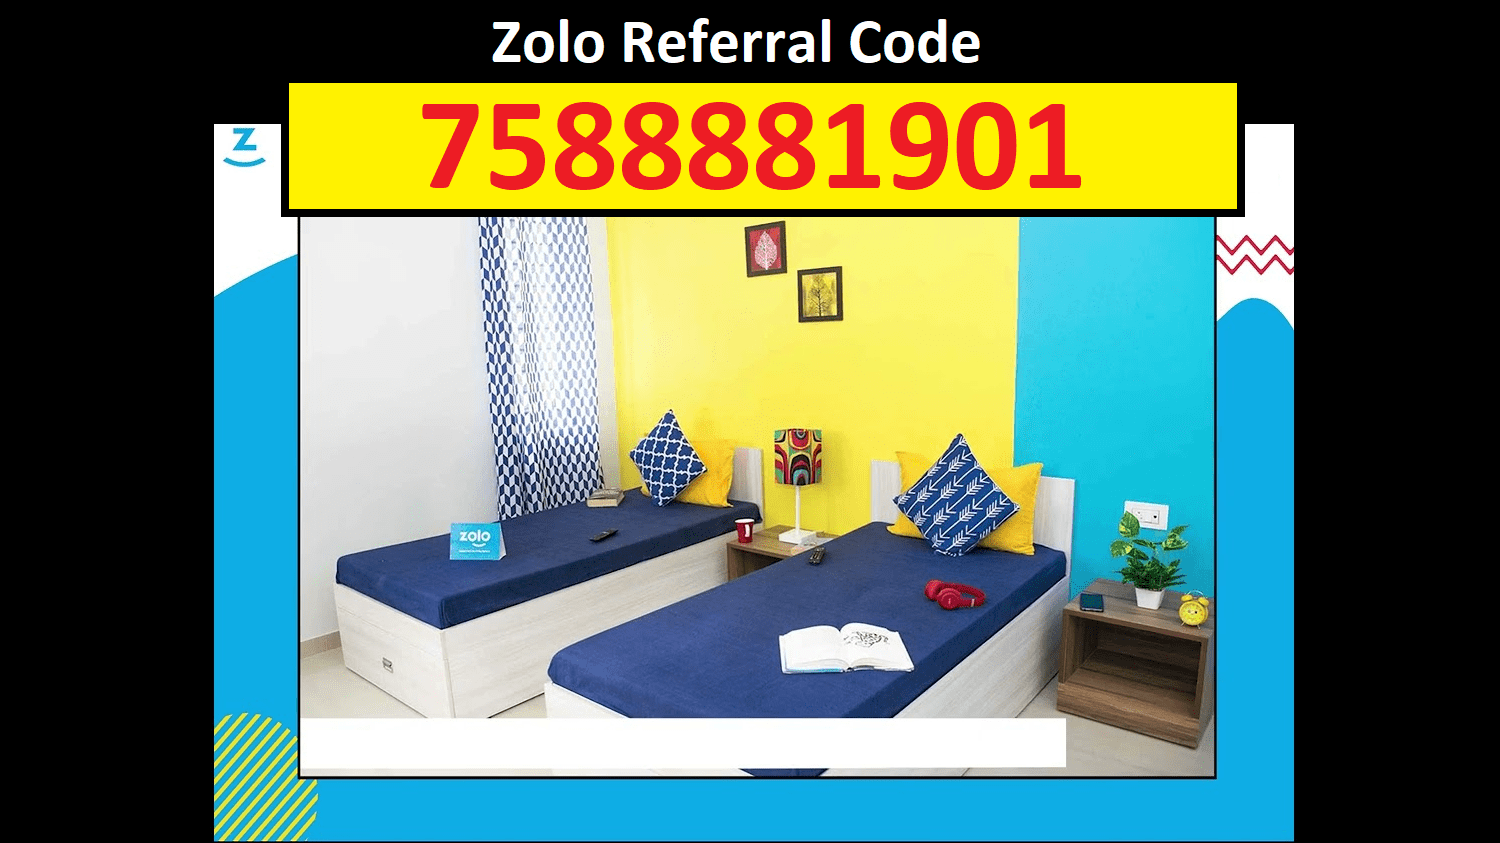 Download APK Zolo Referral Code Get Free ₹600 Discount